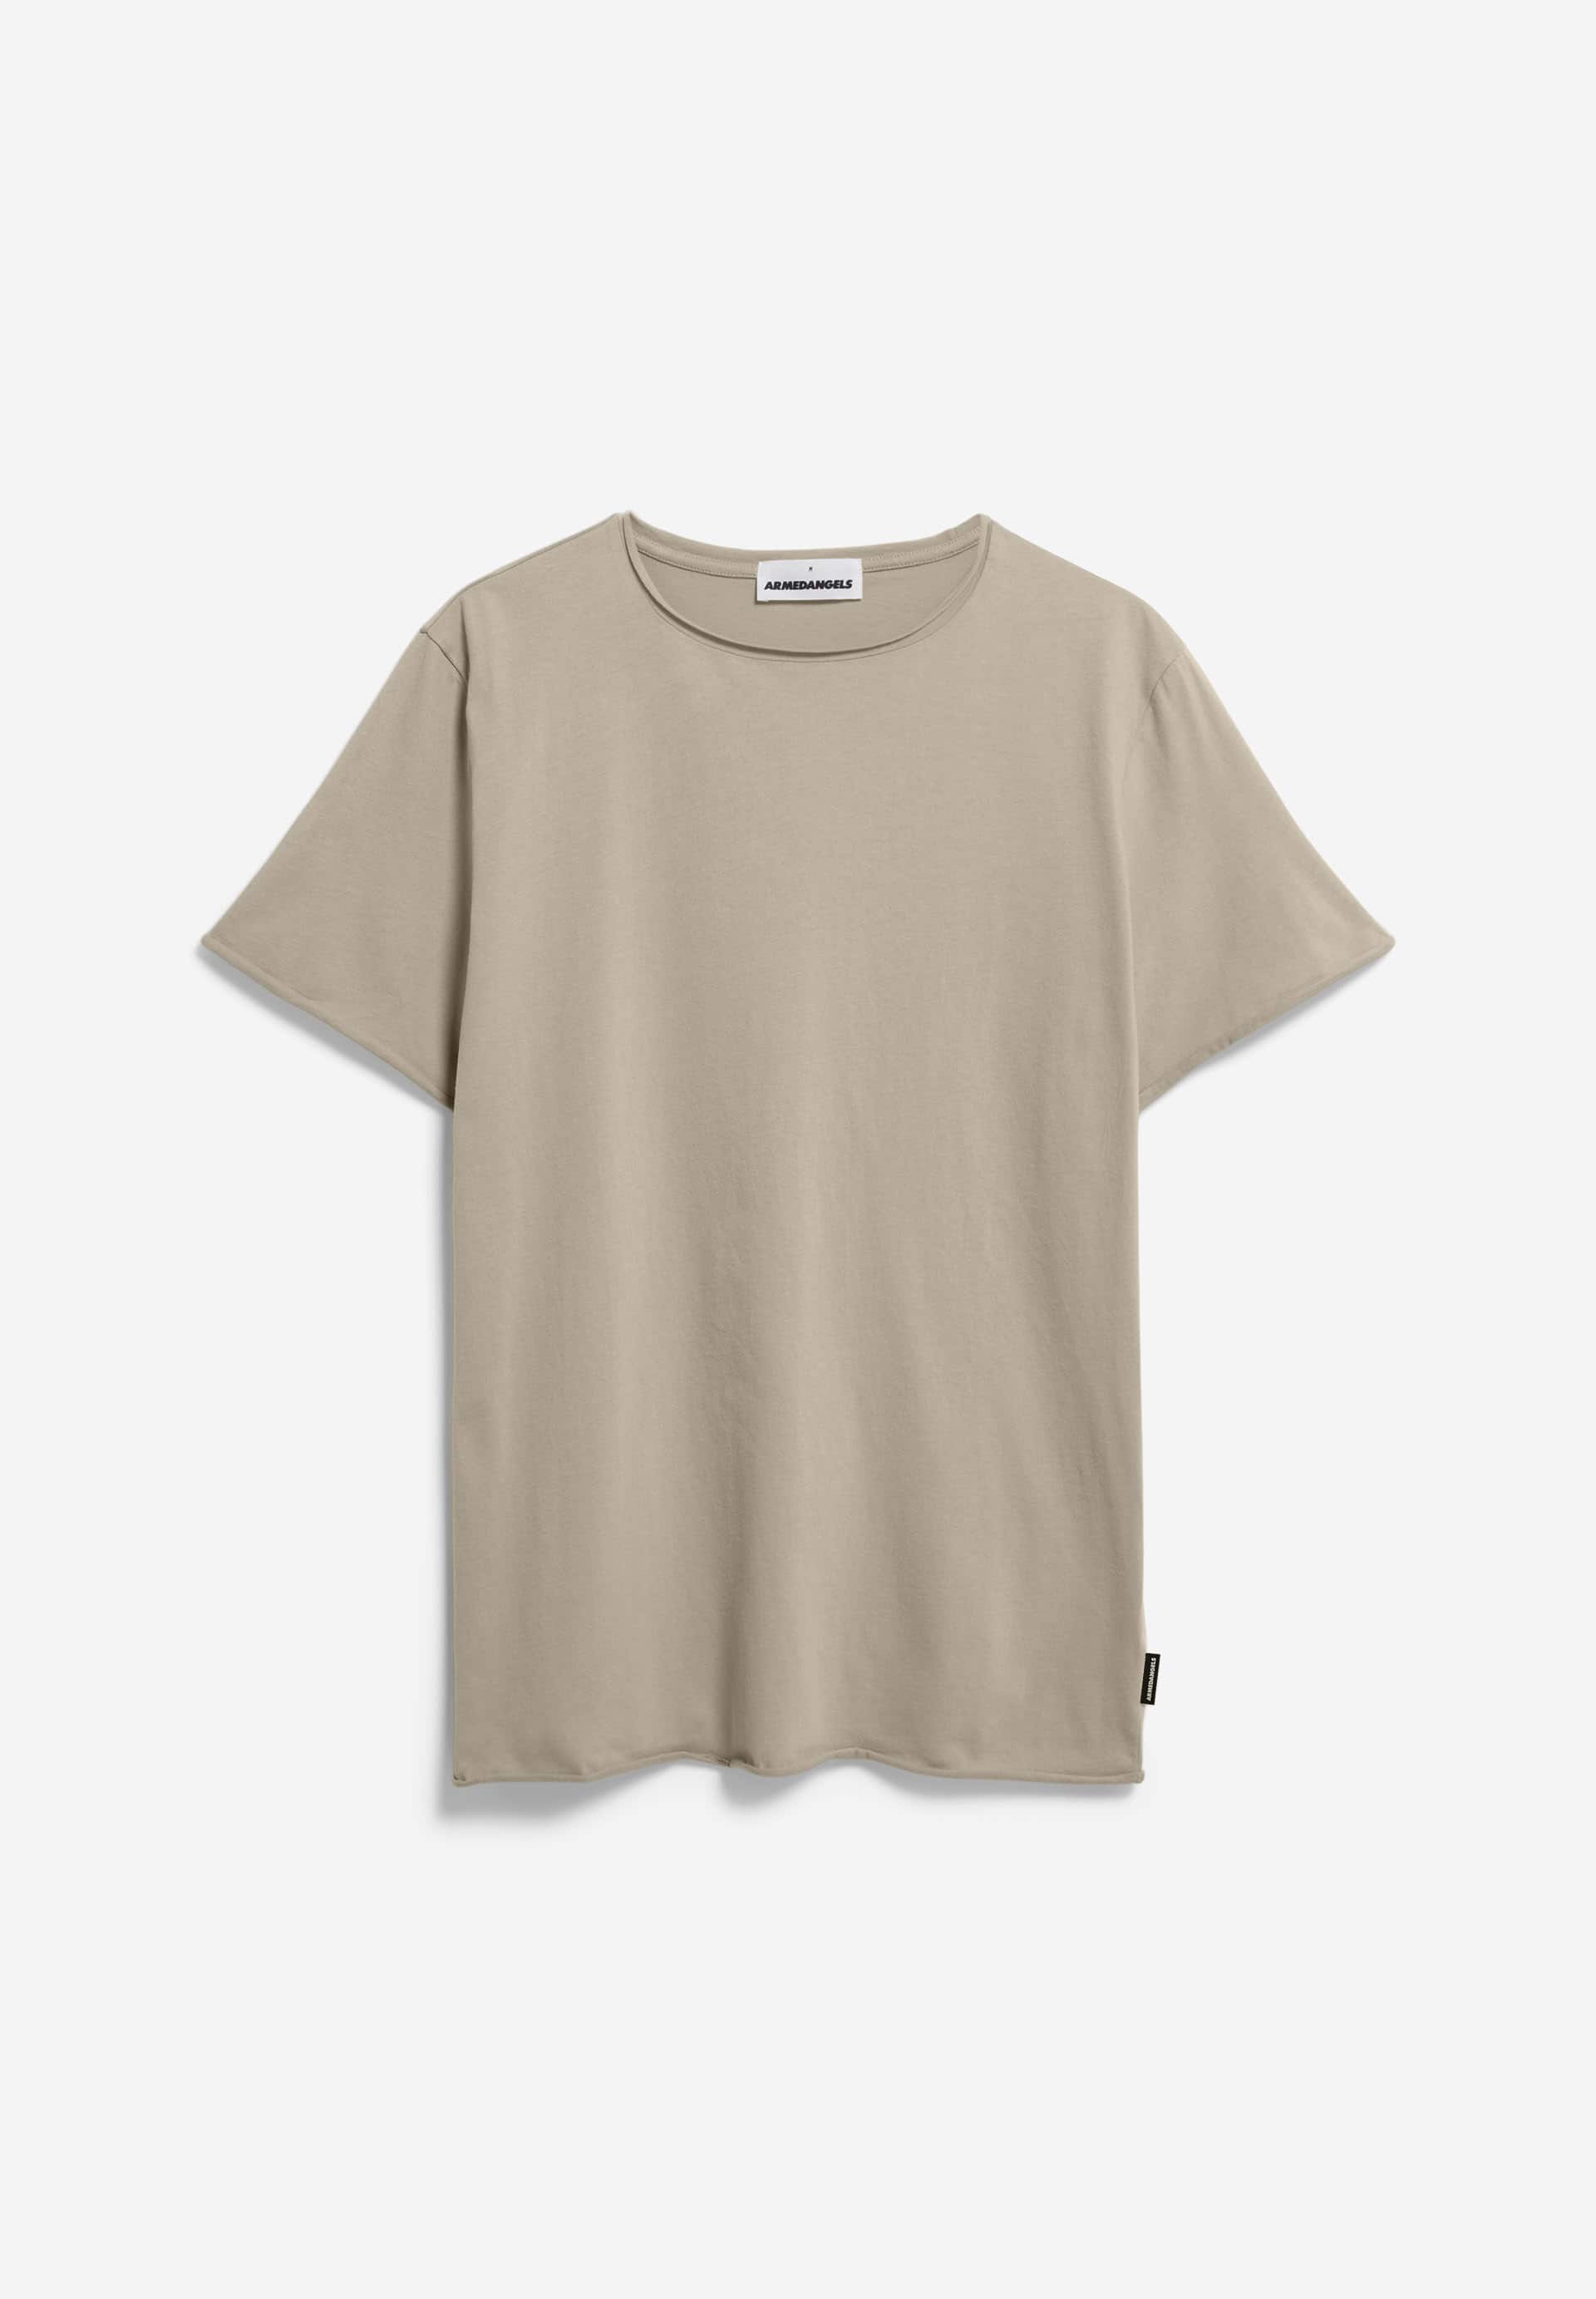 AAMON BRUSHED T-Shirt Regular Fit made of Organic Cotton